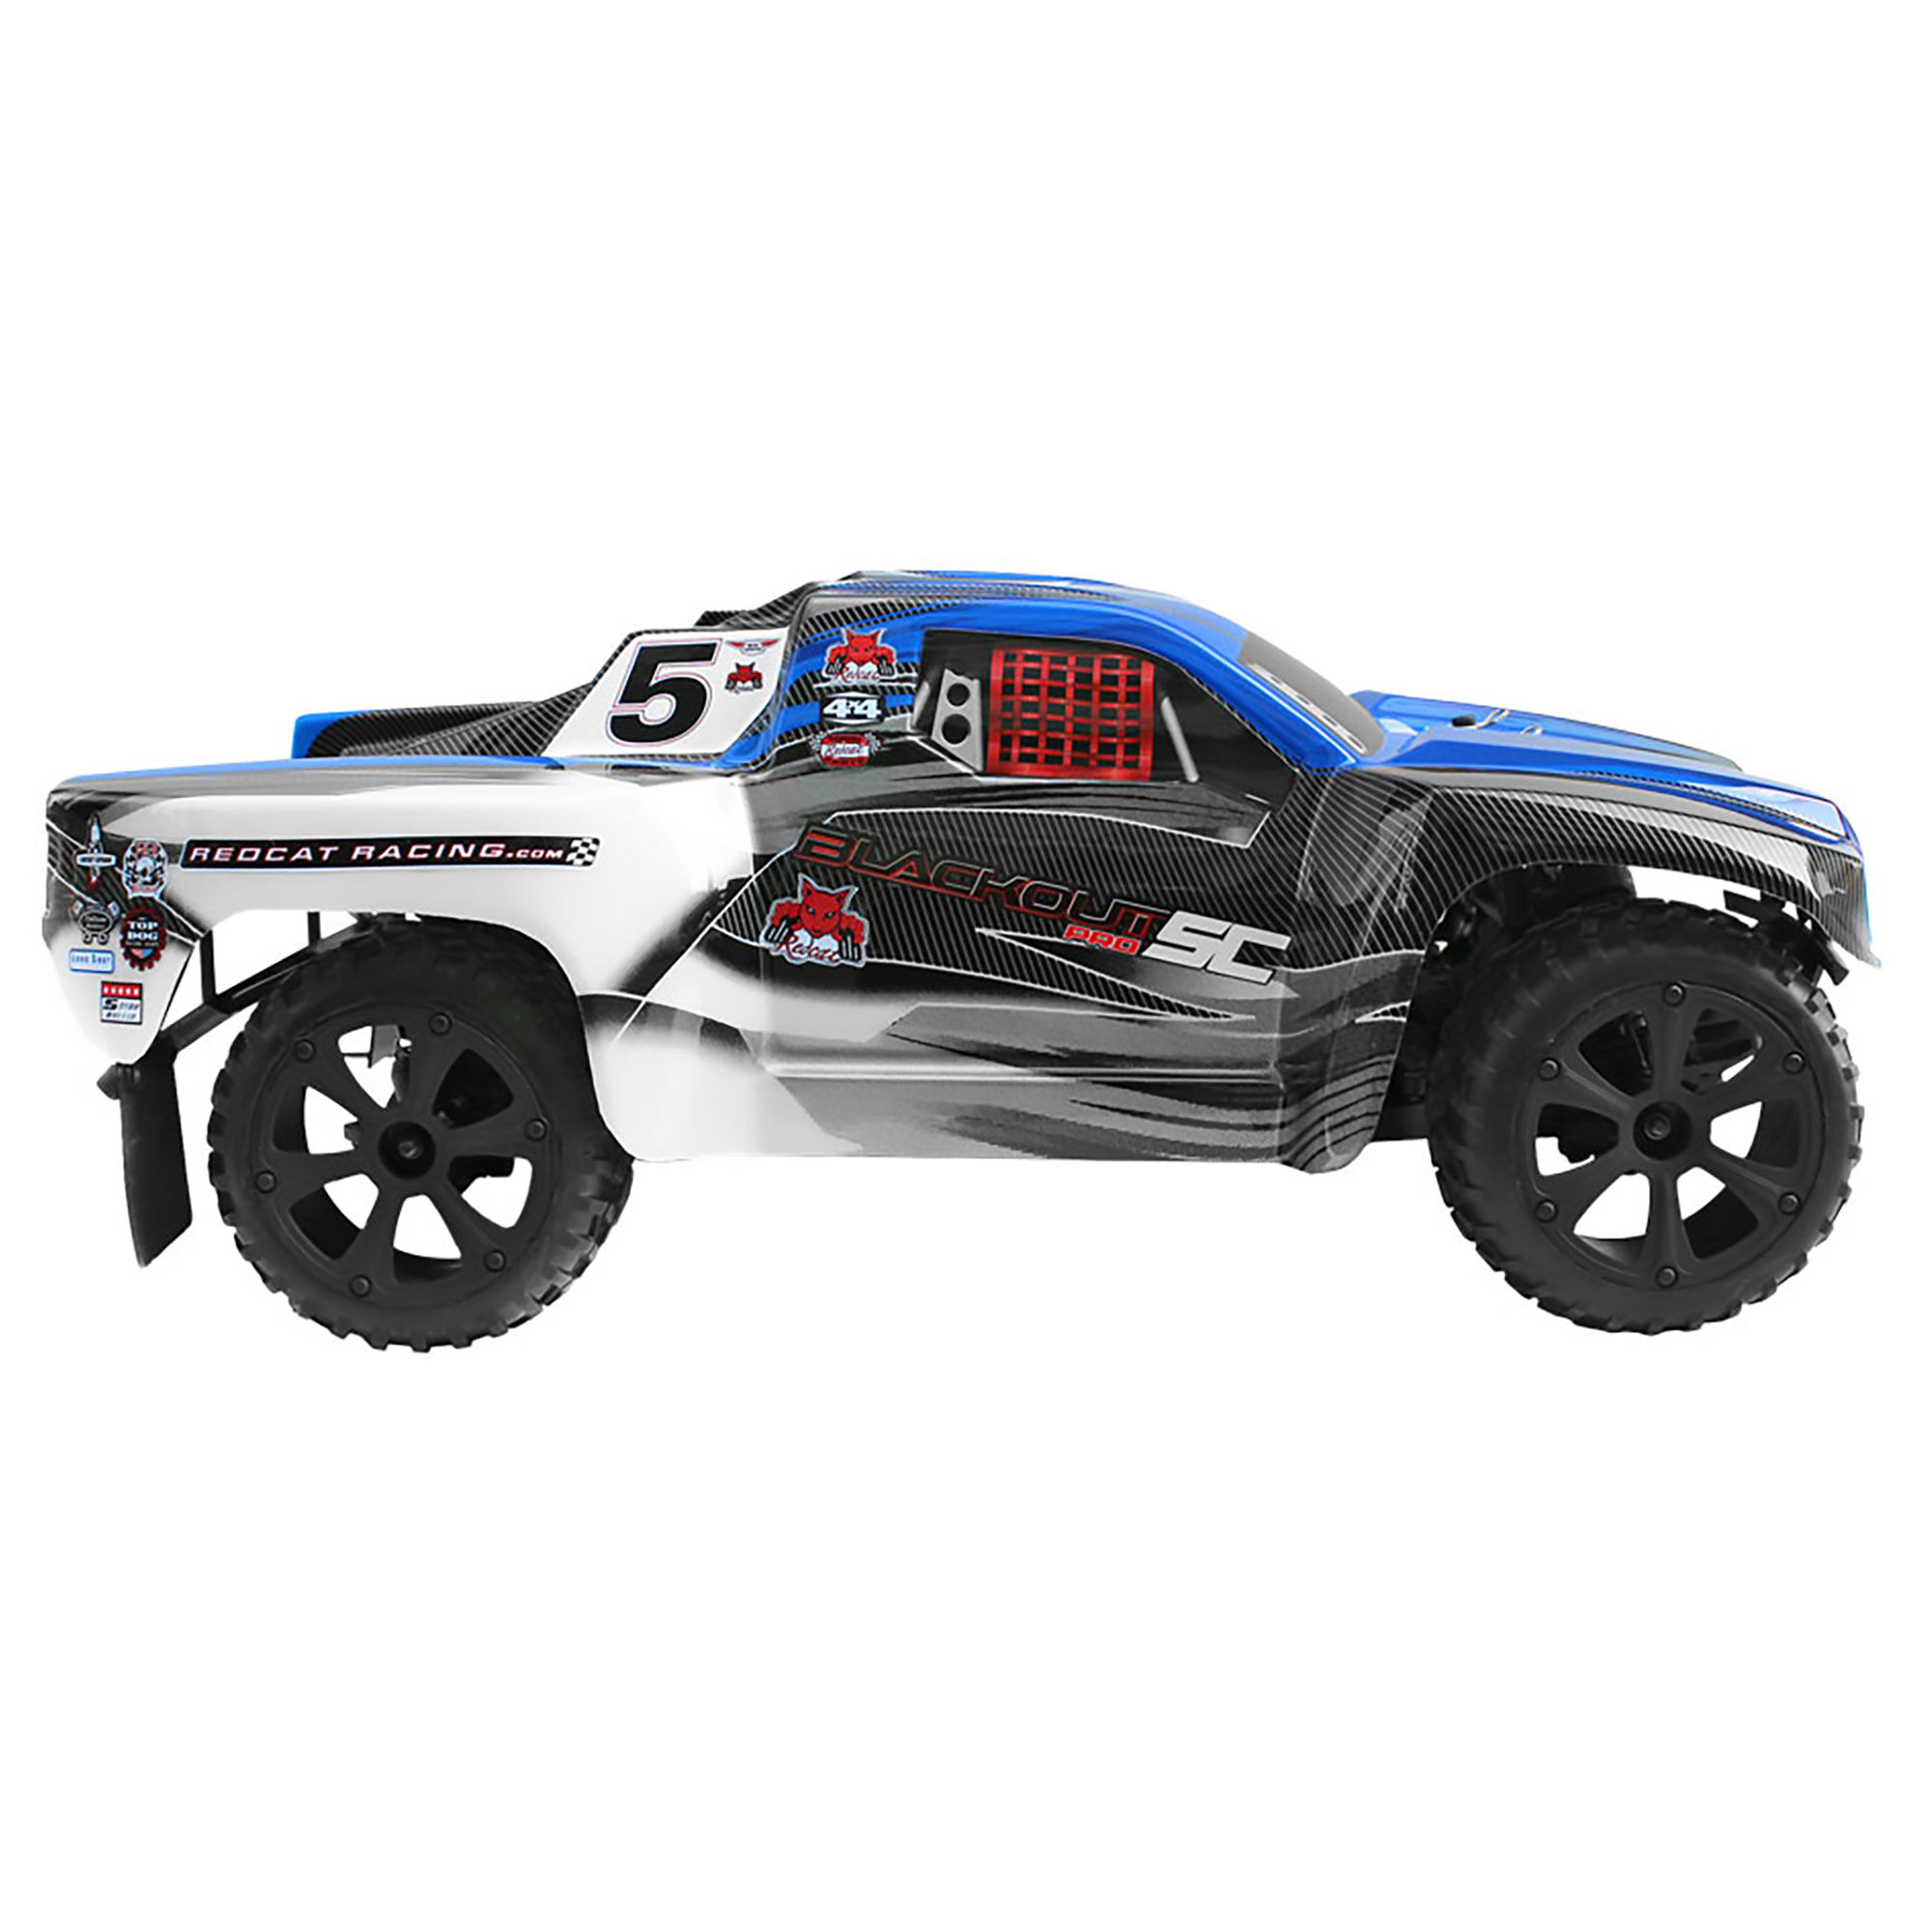 Blue Redcat Racing Blackout SC PRO 1/10 Scale Brushless Electric Short Course Truck with Waterproof Electronics Vehicle